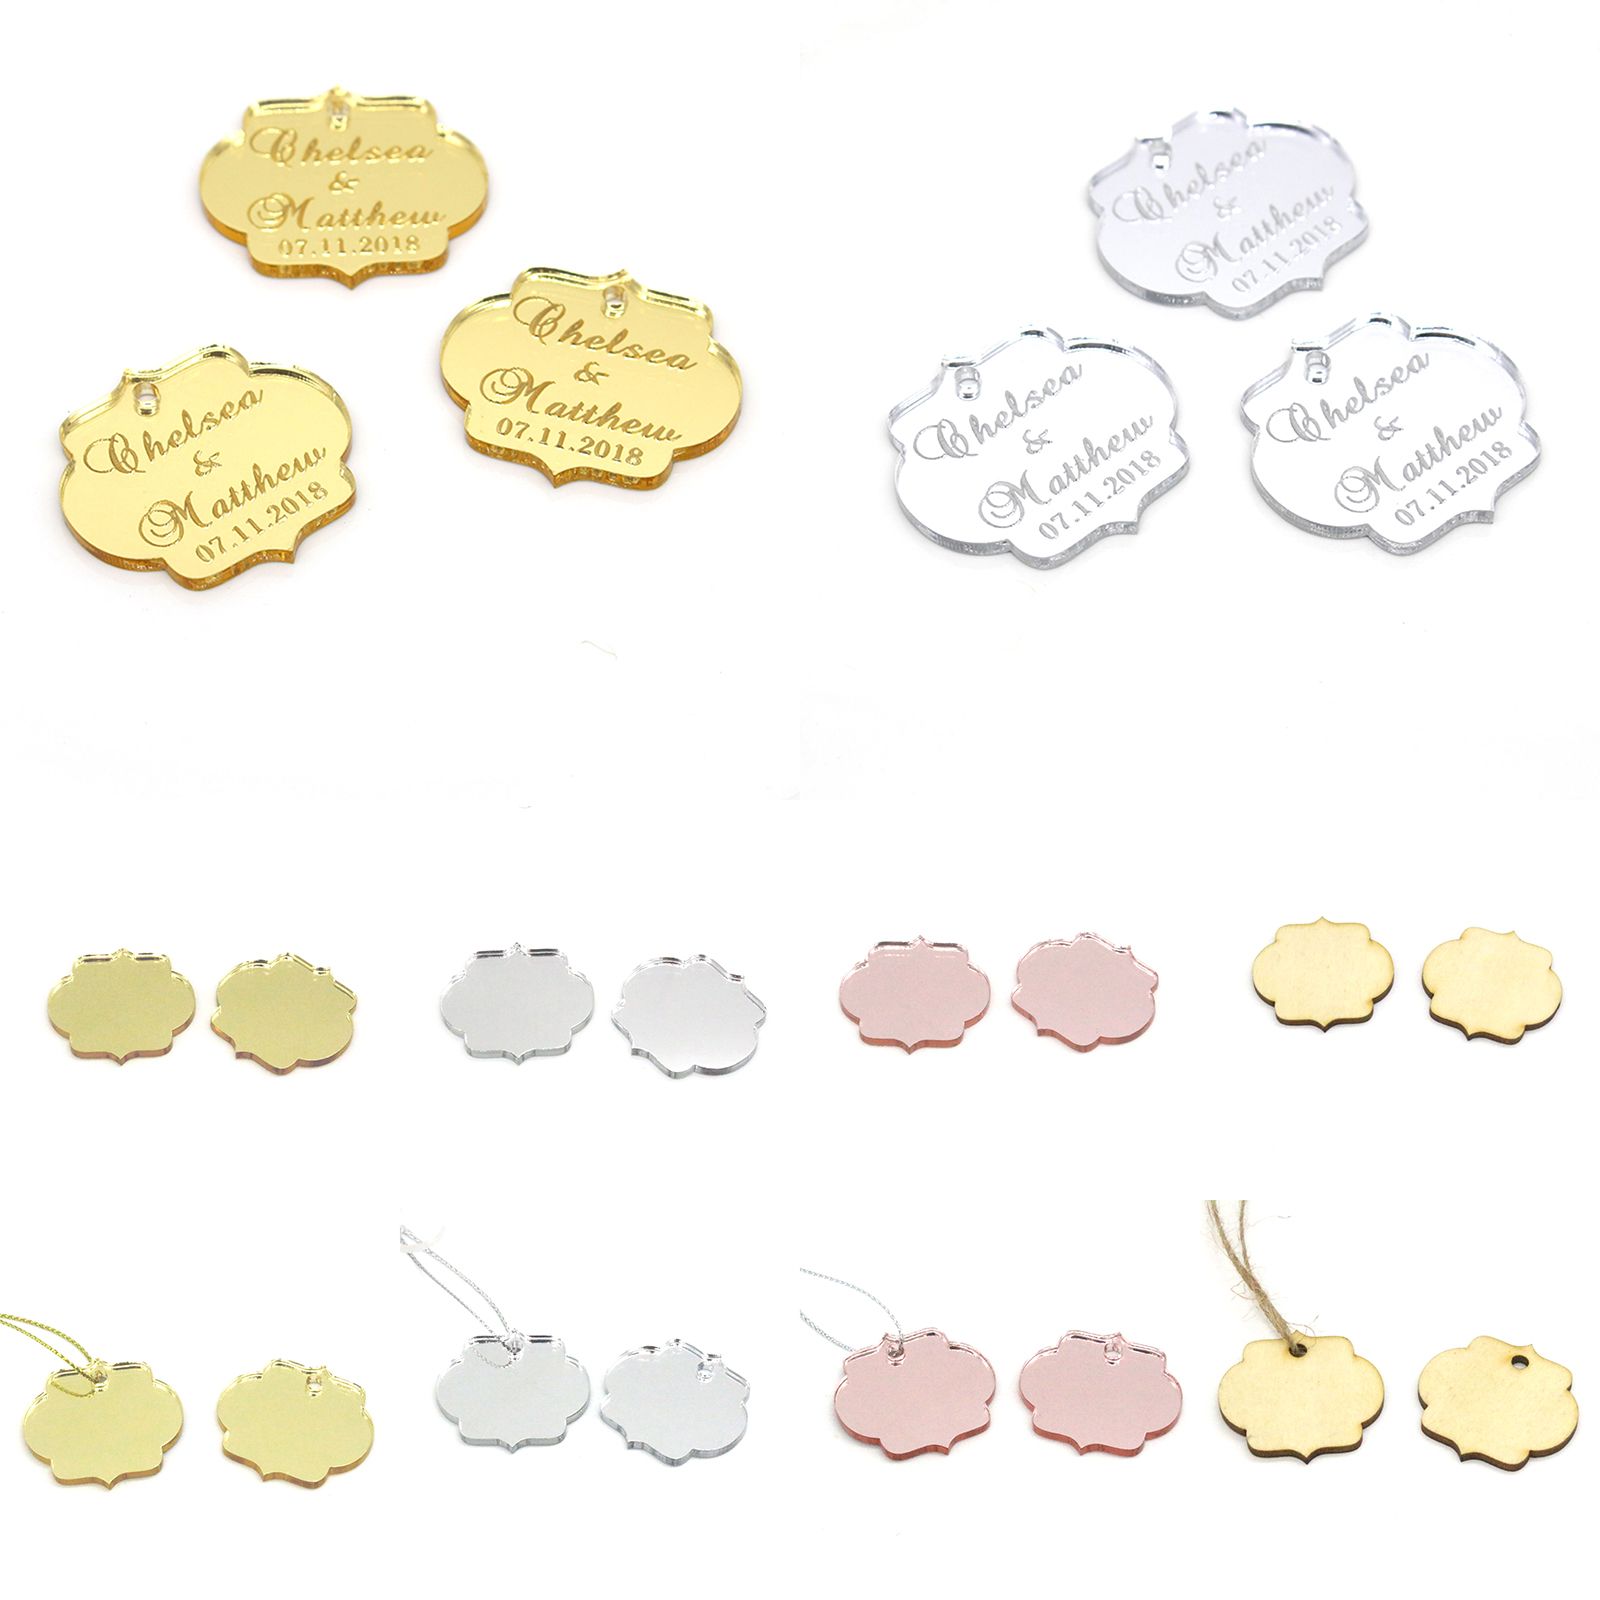 LoveClouds Acrylic Tags Personalized Party Favors For Weddings, Baby  Showers & Baptisms Engraved Names, Set Of 30/50/100 Christmas Decoration  Gift From Cong09, $12.5